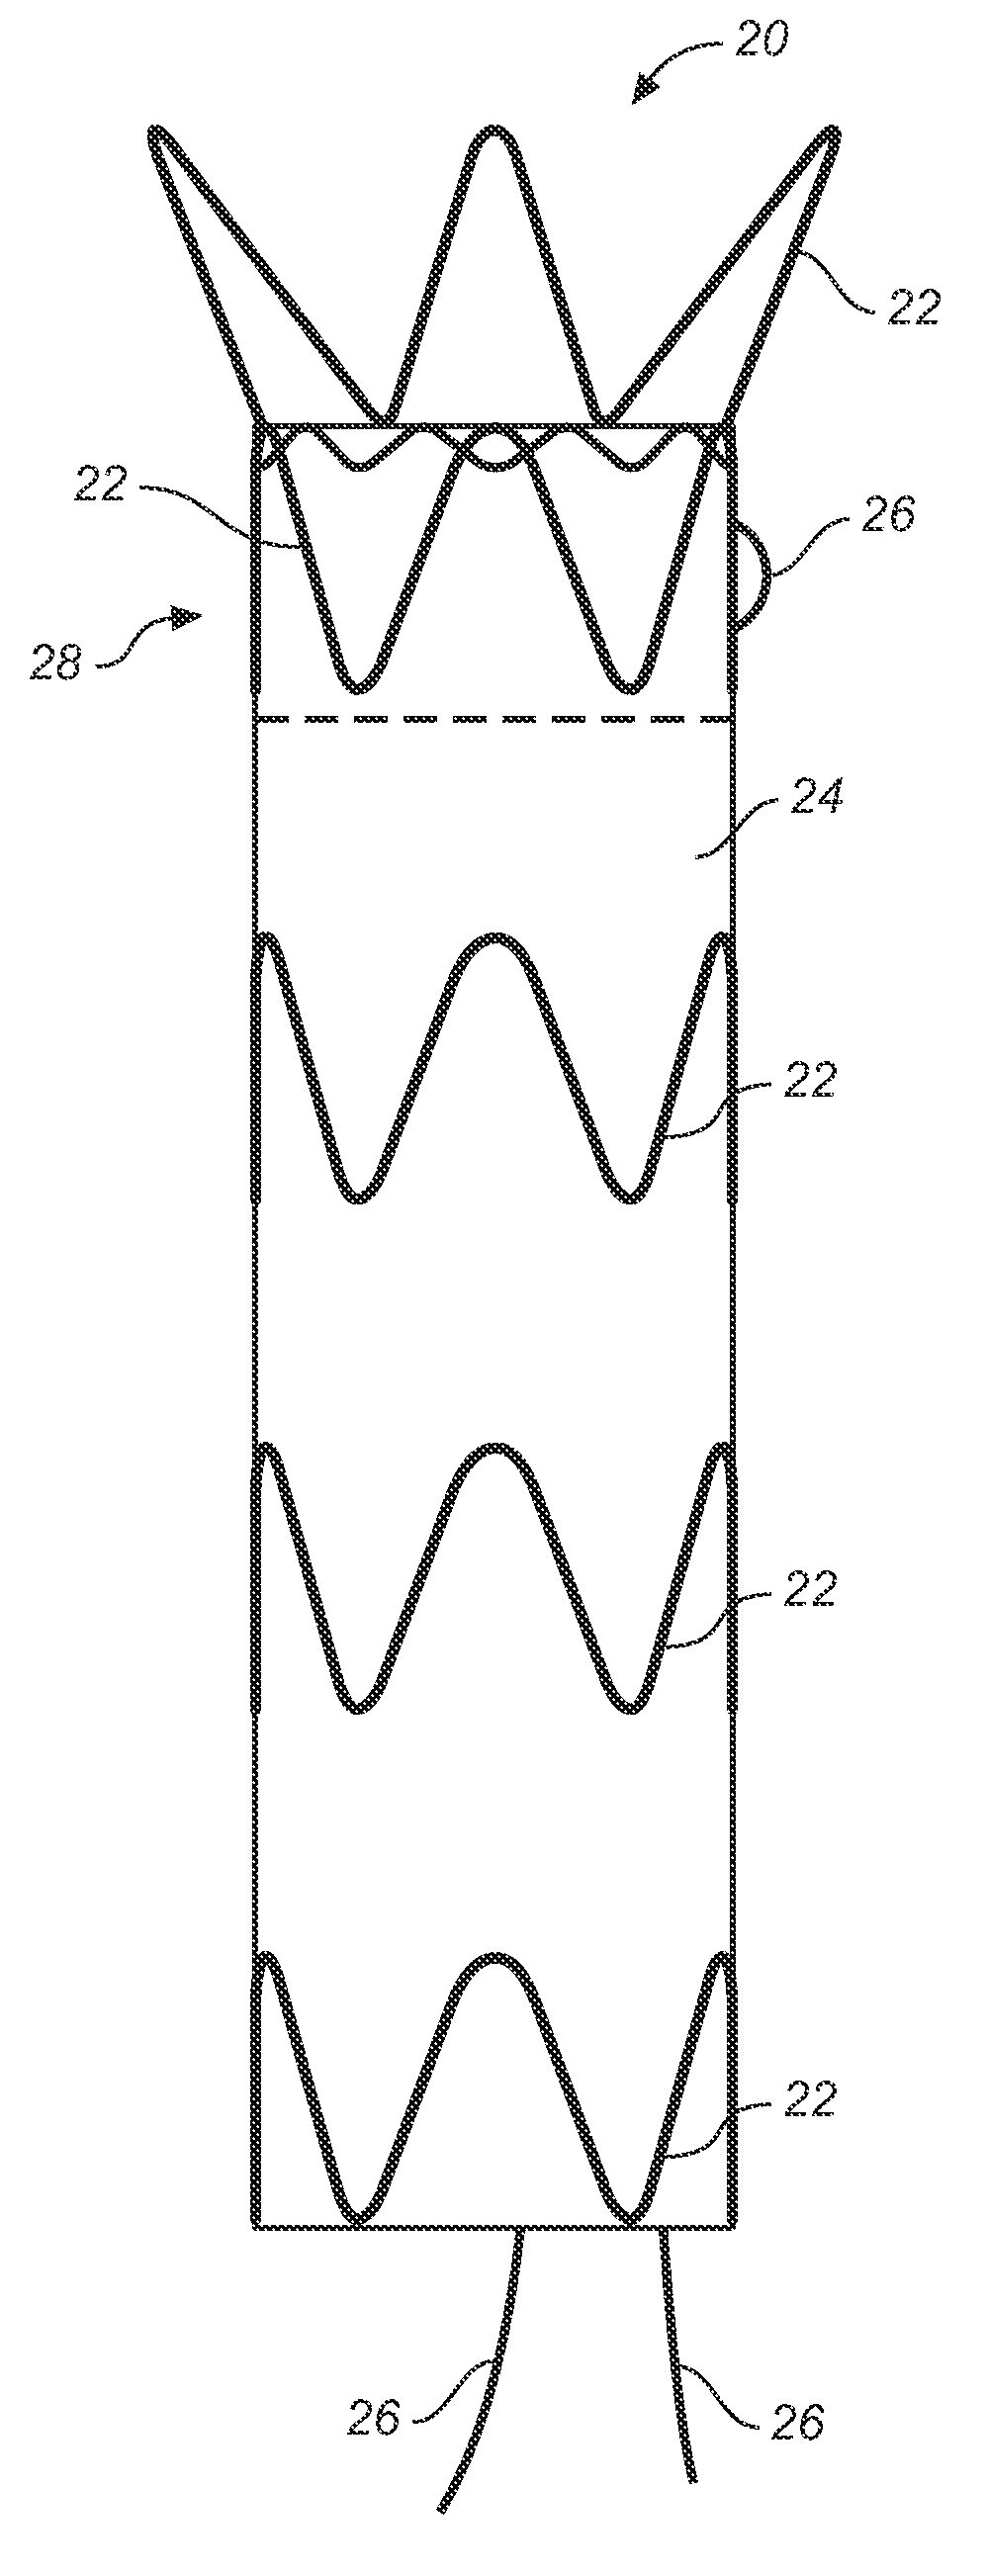 Stent graft fixation system and method